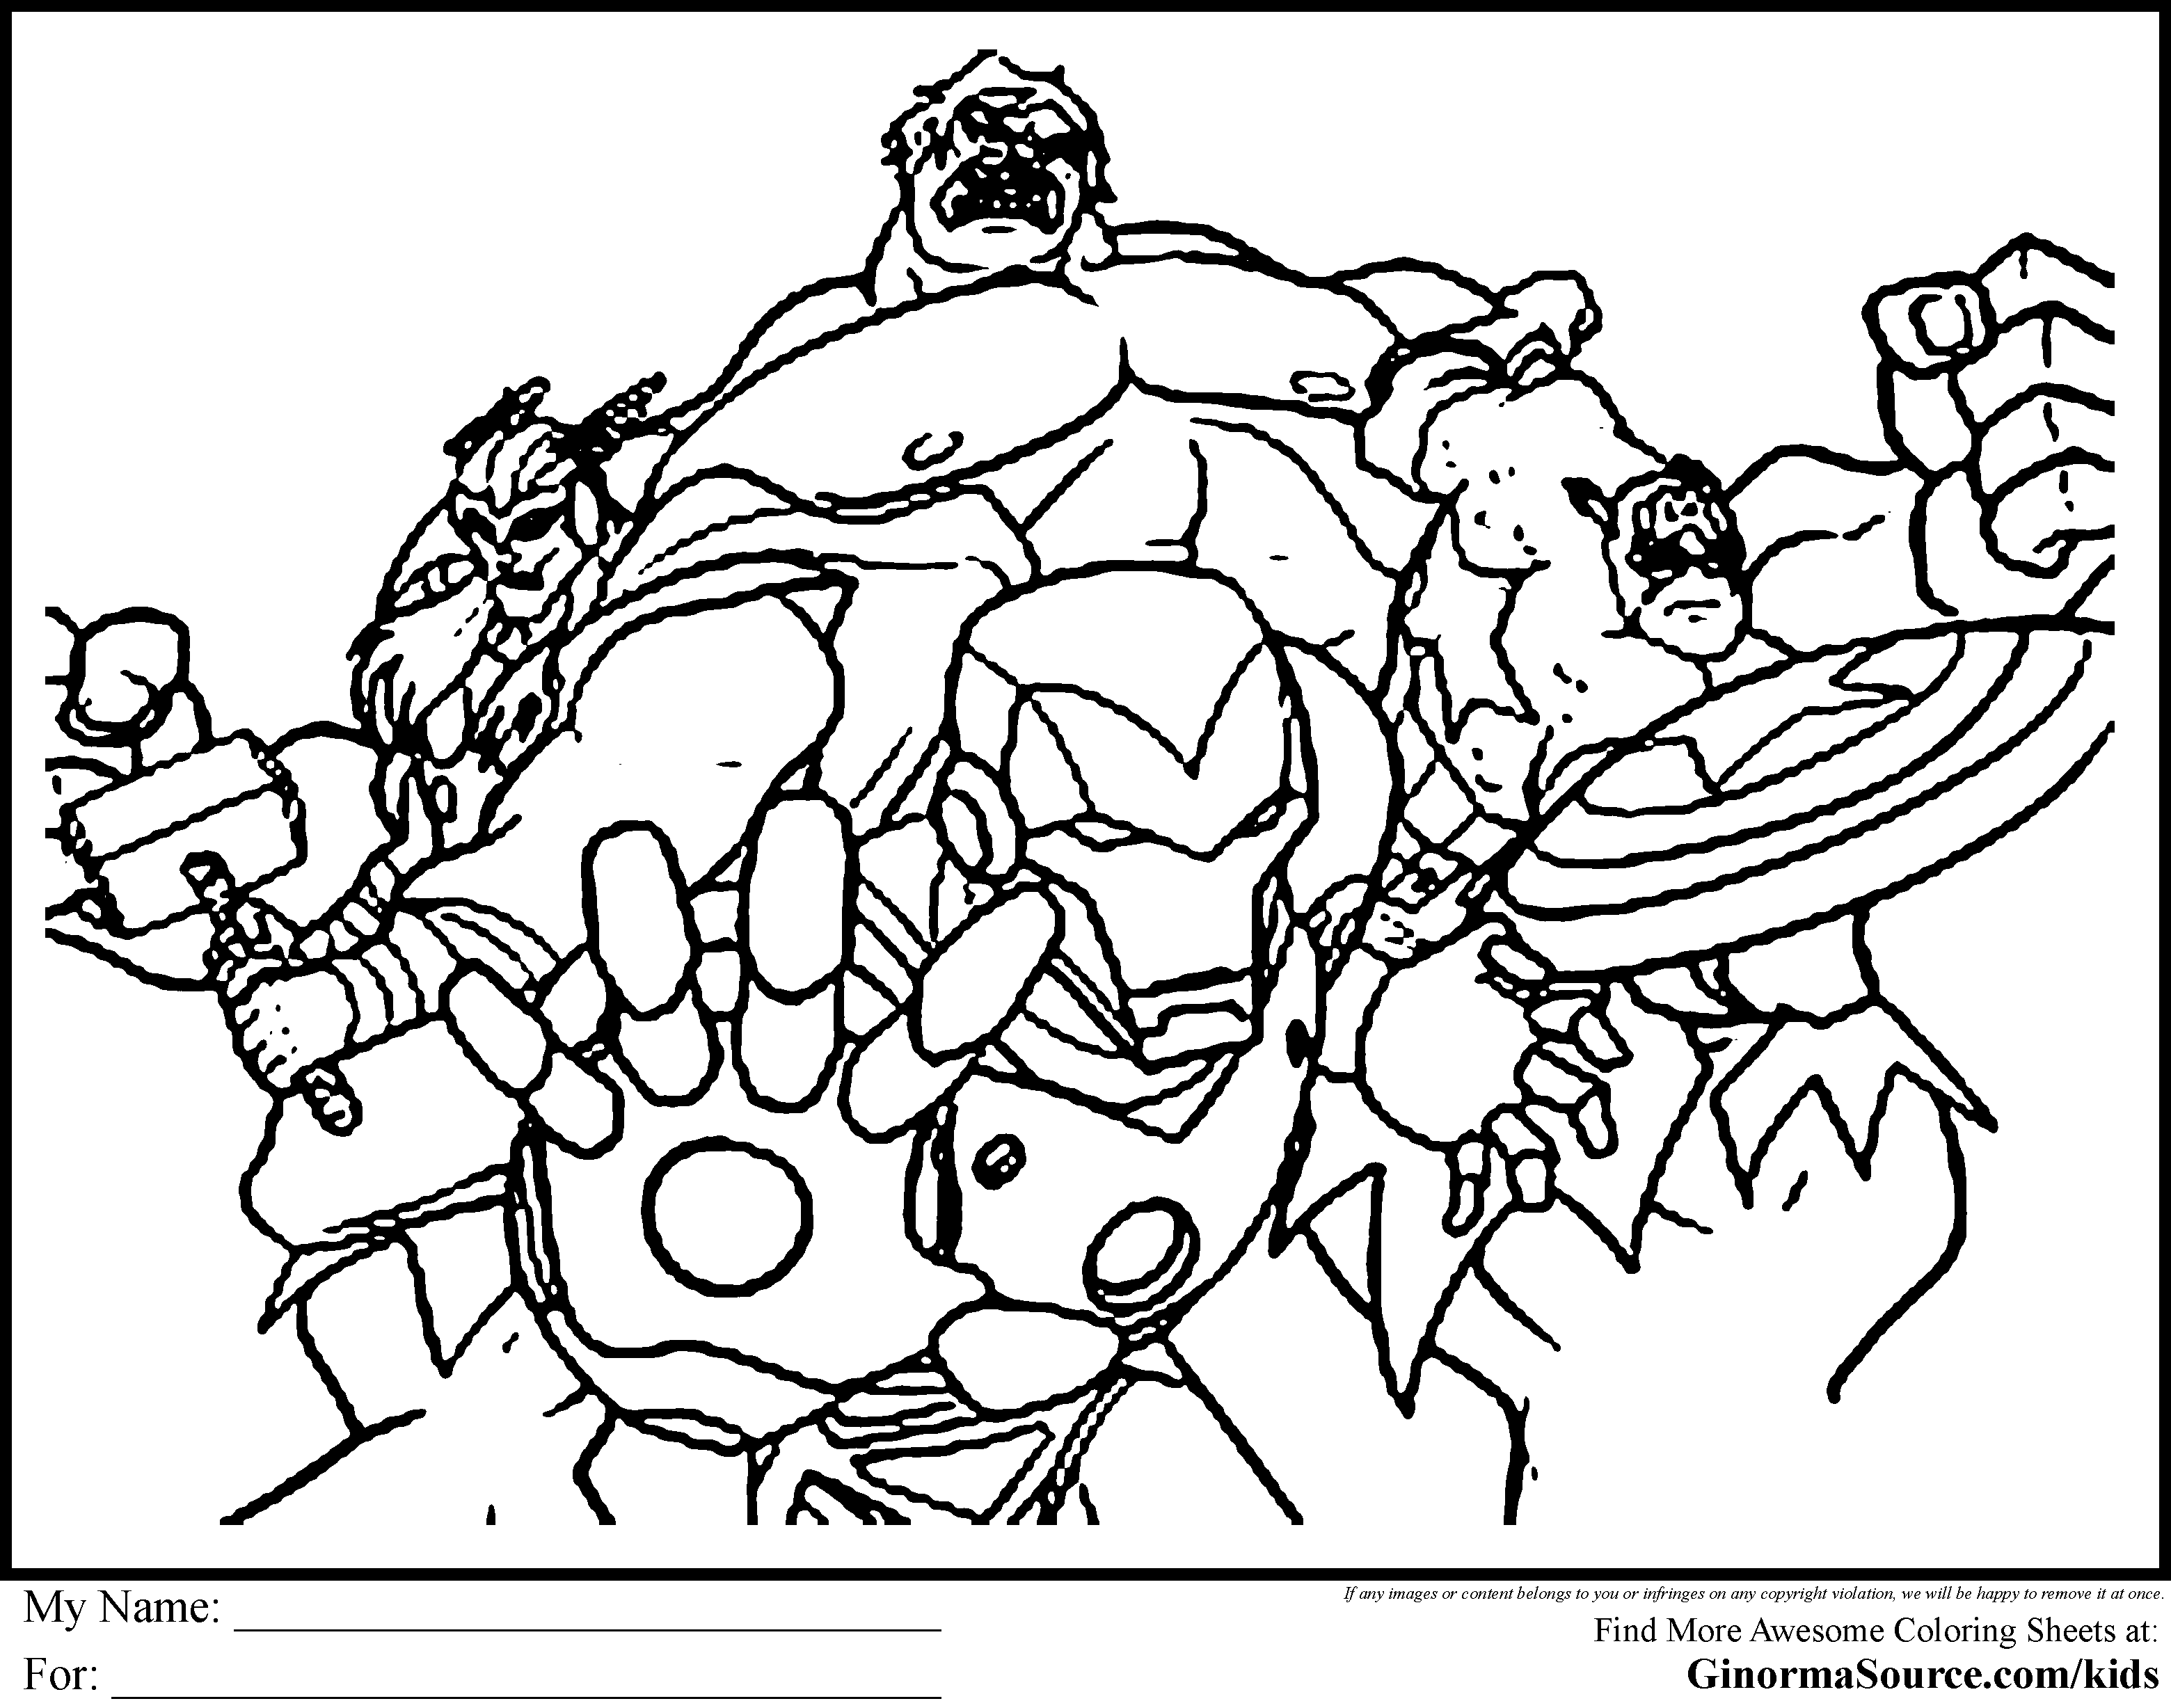 Avengers Coloring Pages Printable